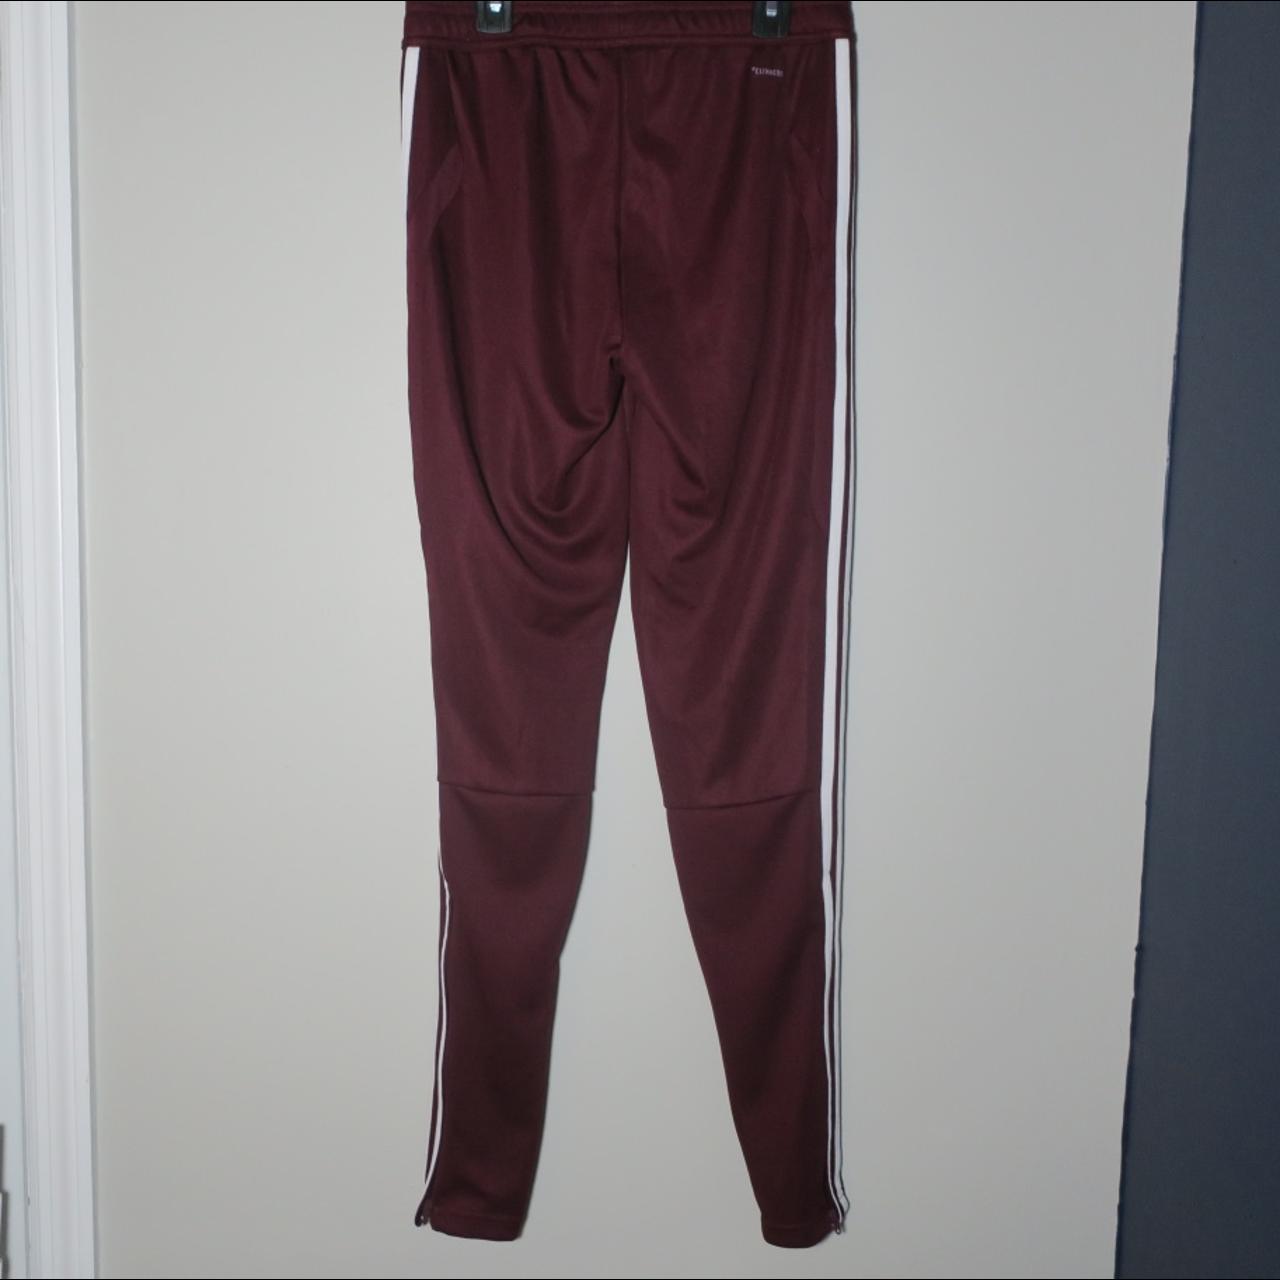 Adidas track pants | lightweight and great for... - Depop